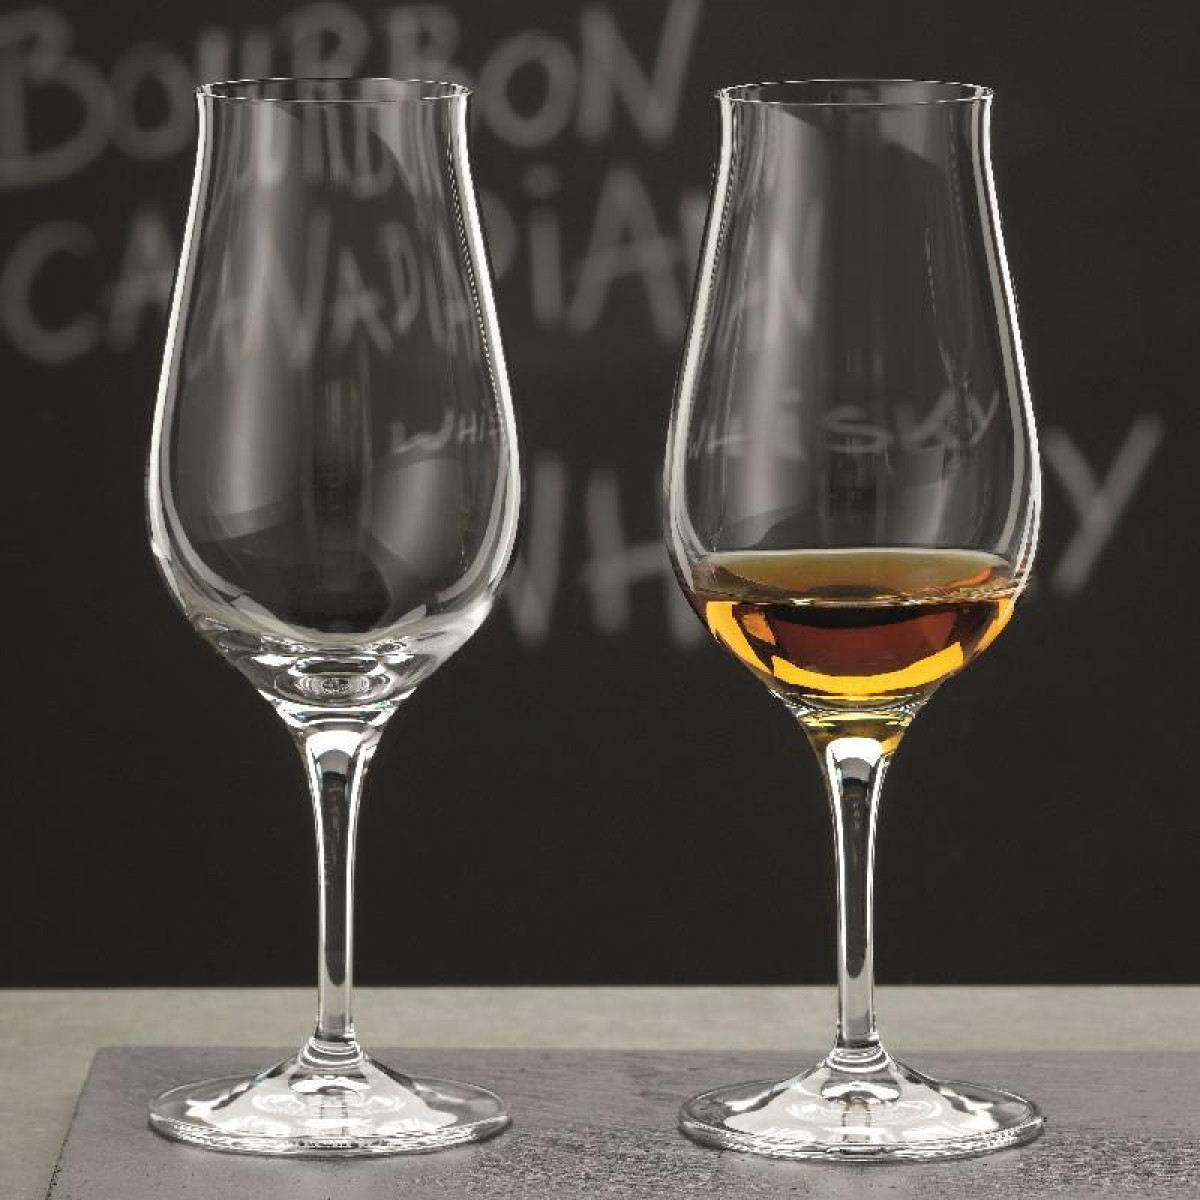 The Tulip Whisky Glass